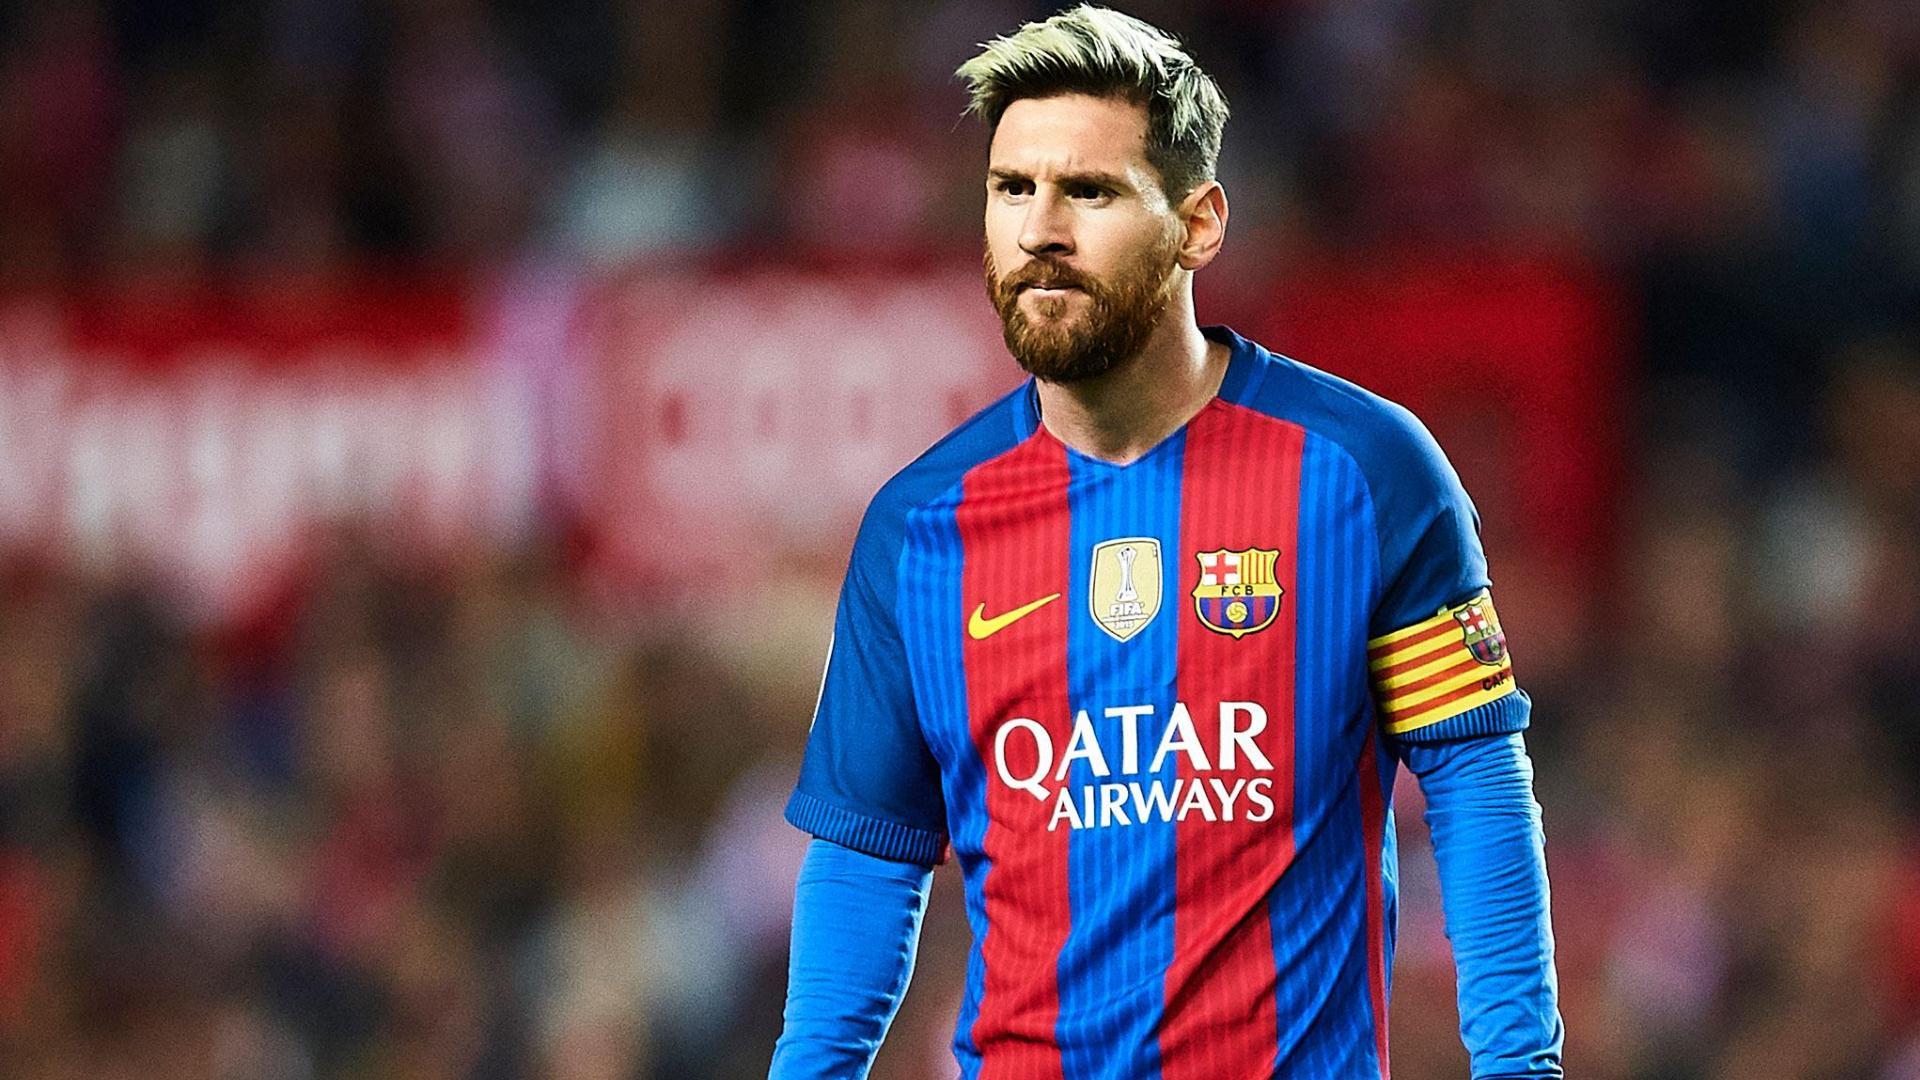 Lionel Messi - $400 Mil Net Worth, 10 Incredible Facts, Lifestyle, Achievements And Facts